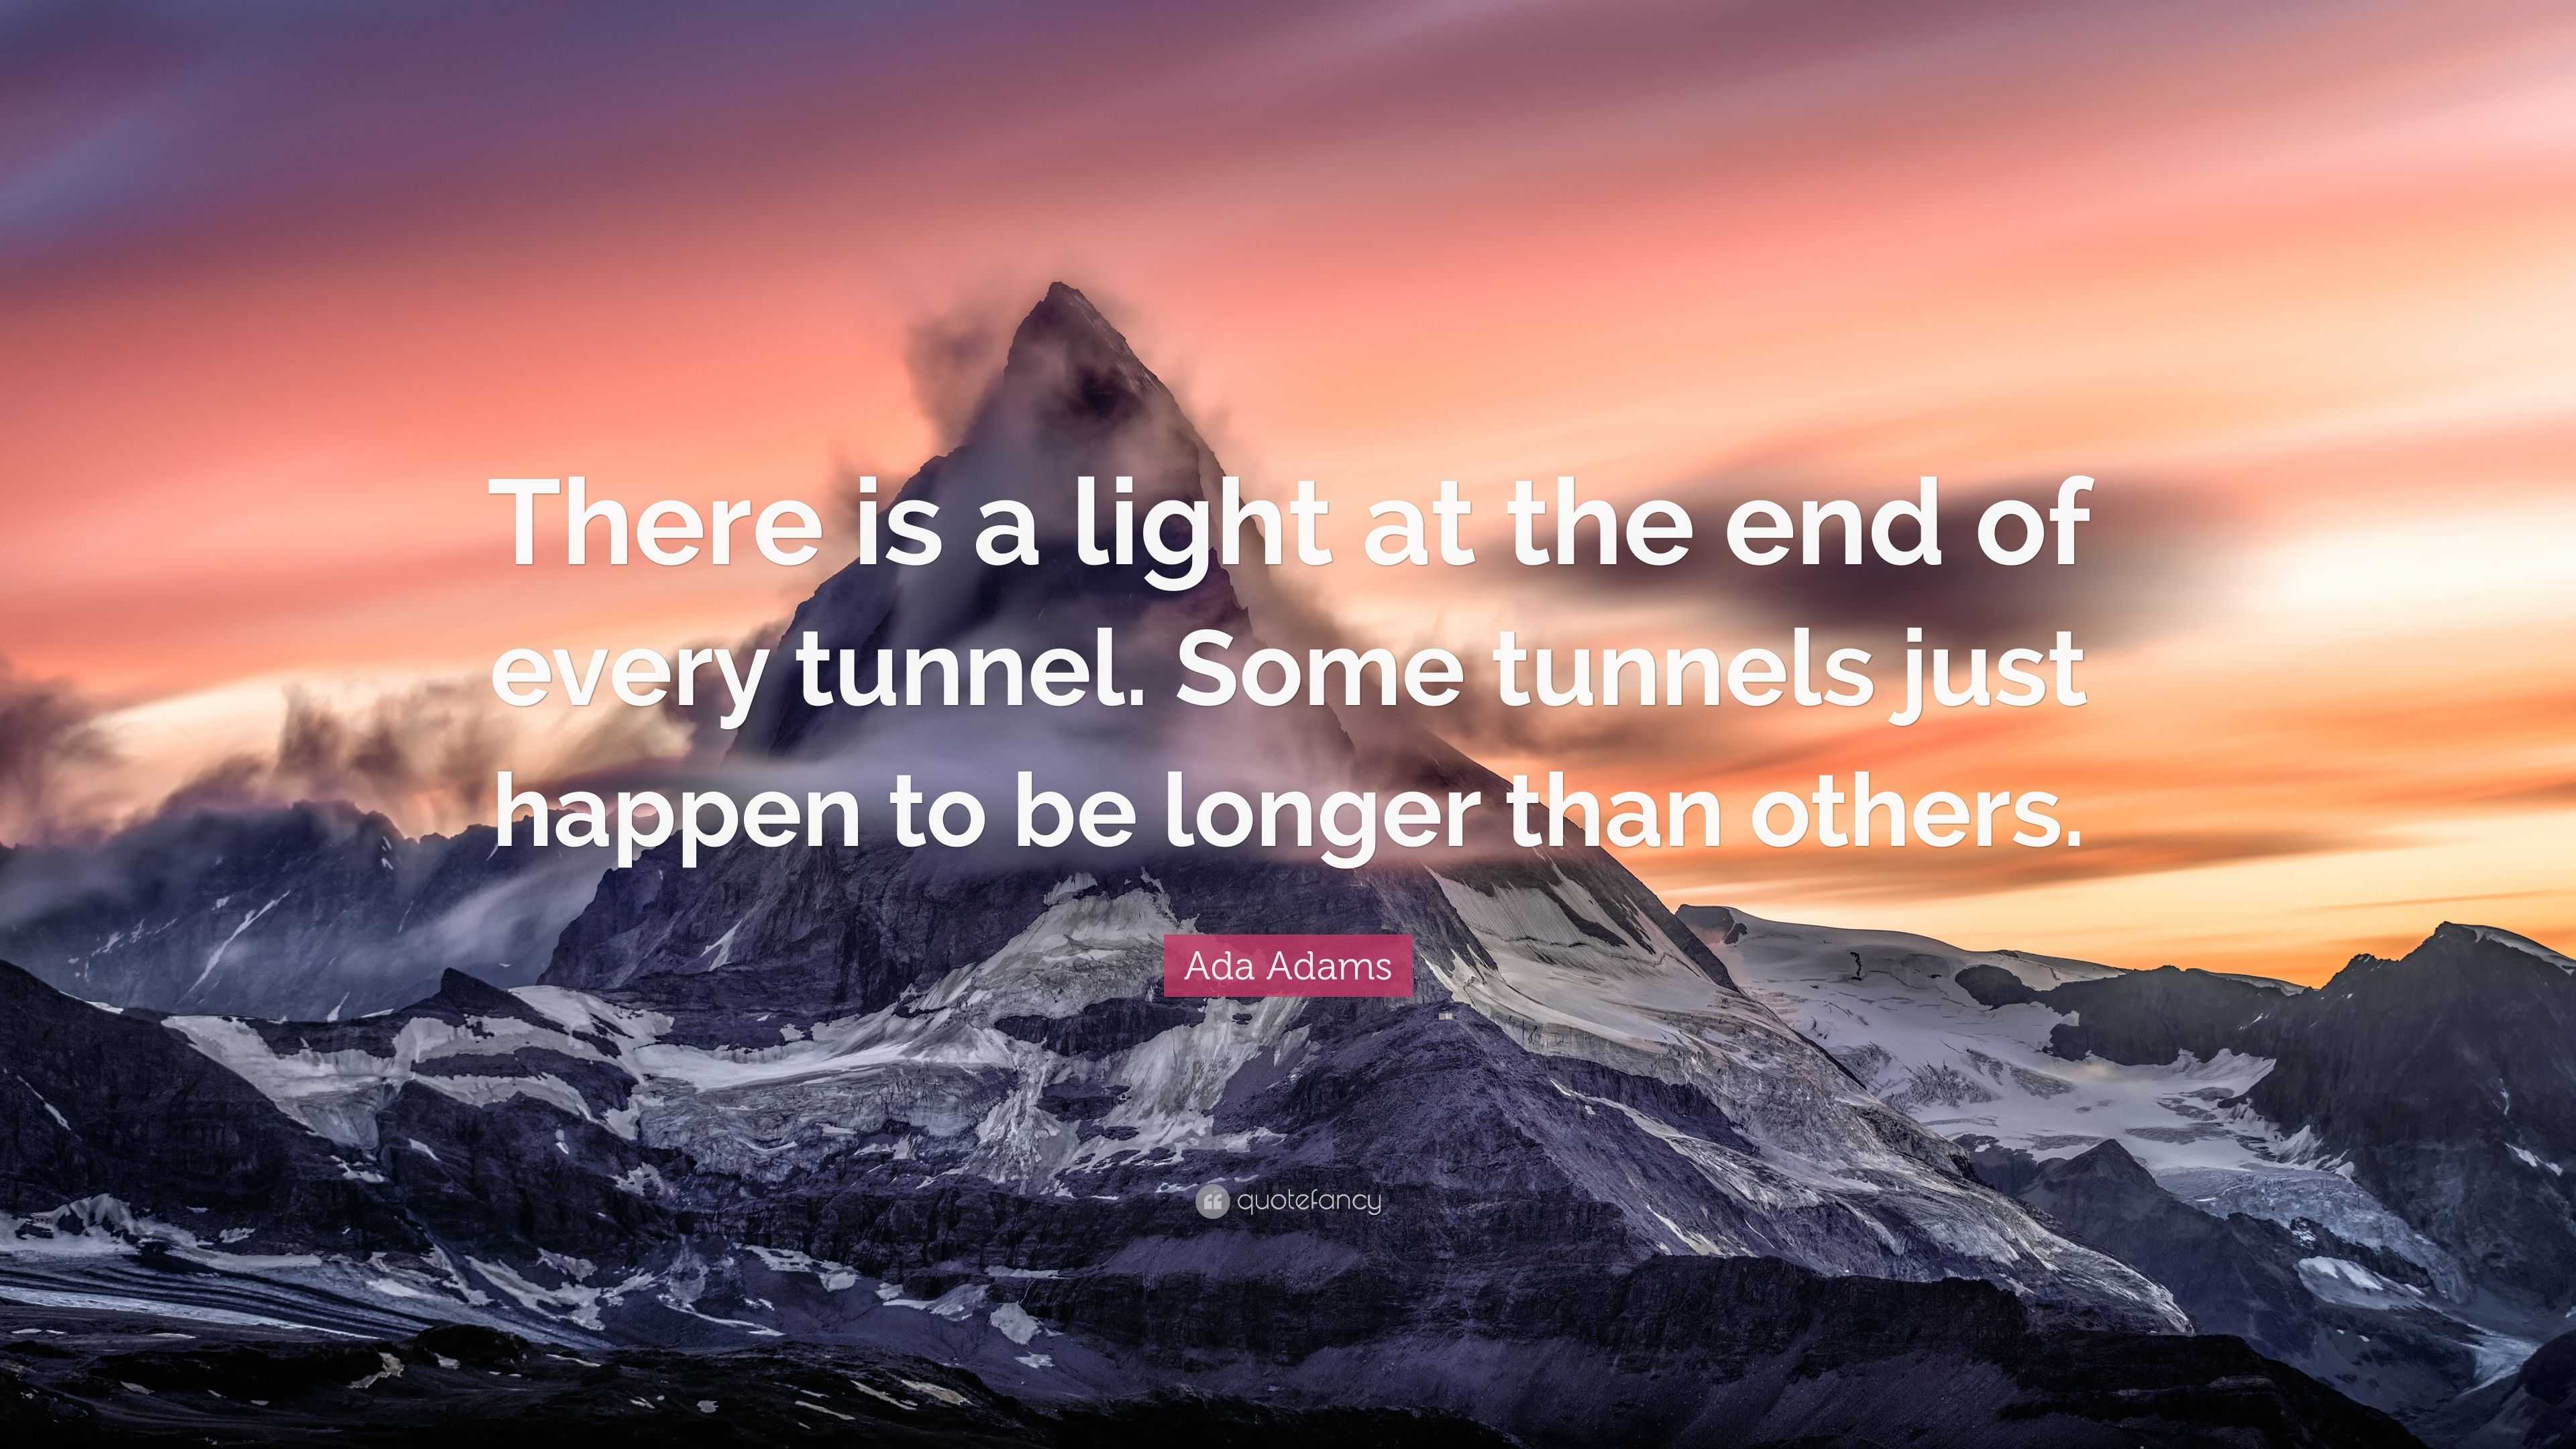 Ada Adams Quote There Is A Light At The End Of Every Tunnel Some Tunnels Just